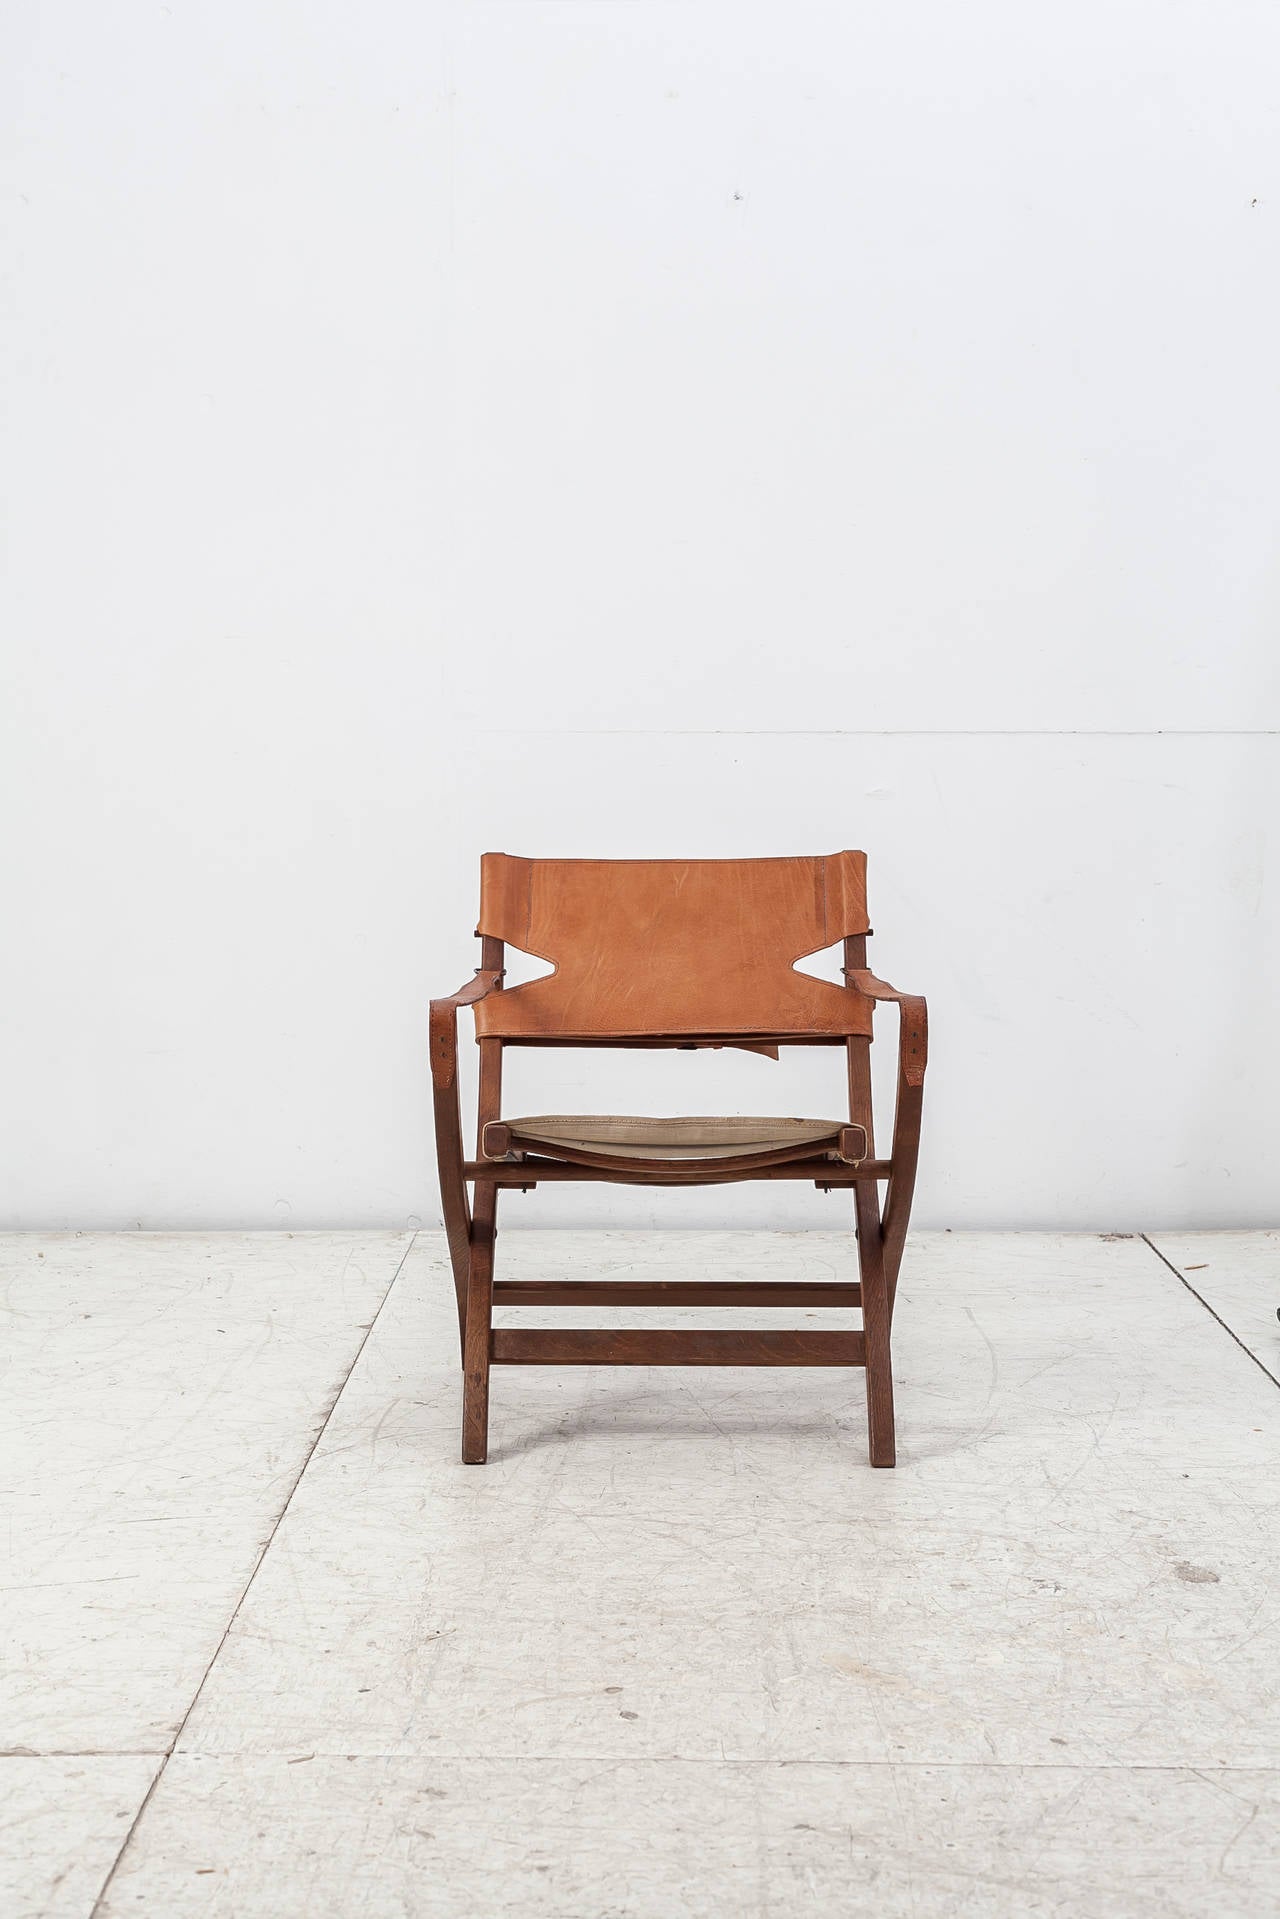 A folding safari chair by Danish designer Poul Hundevad. The chair is made of a teak frame with a canvas seating and leather back rest, with leather straps. This piece is labeled by Poul Hundevad, Vamdrup.